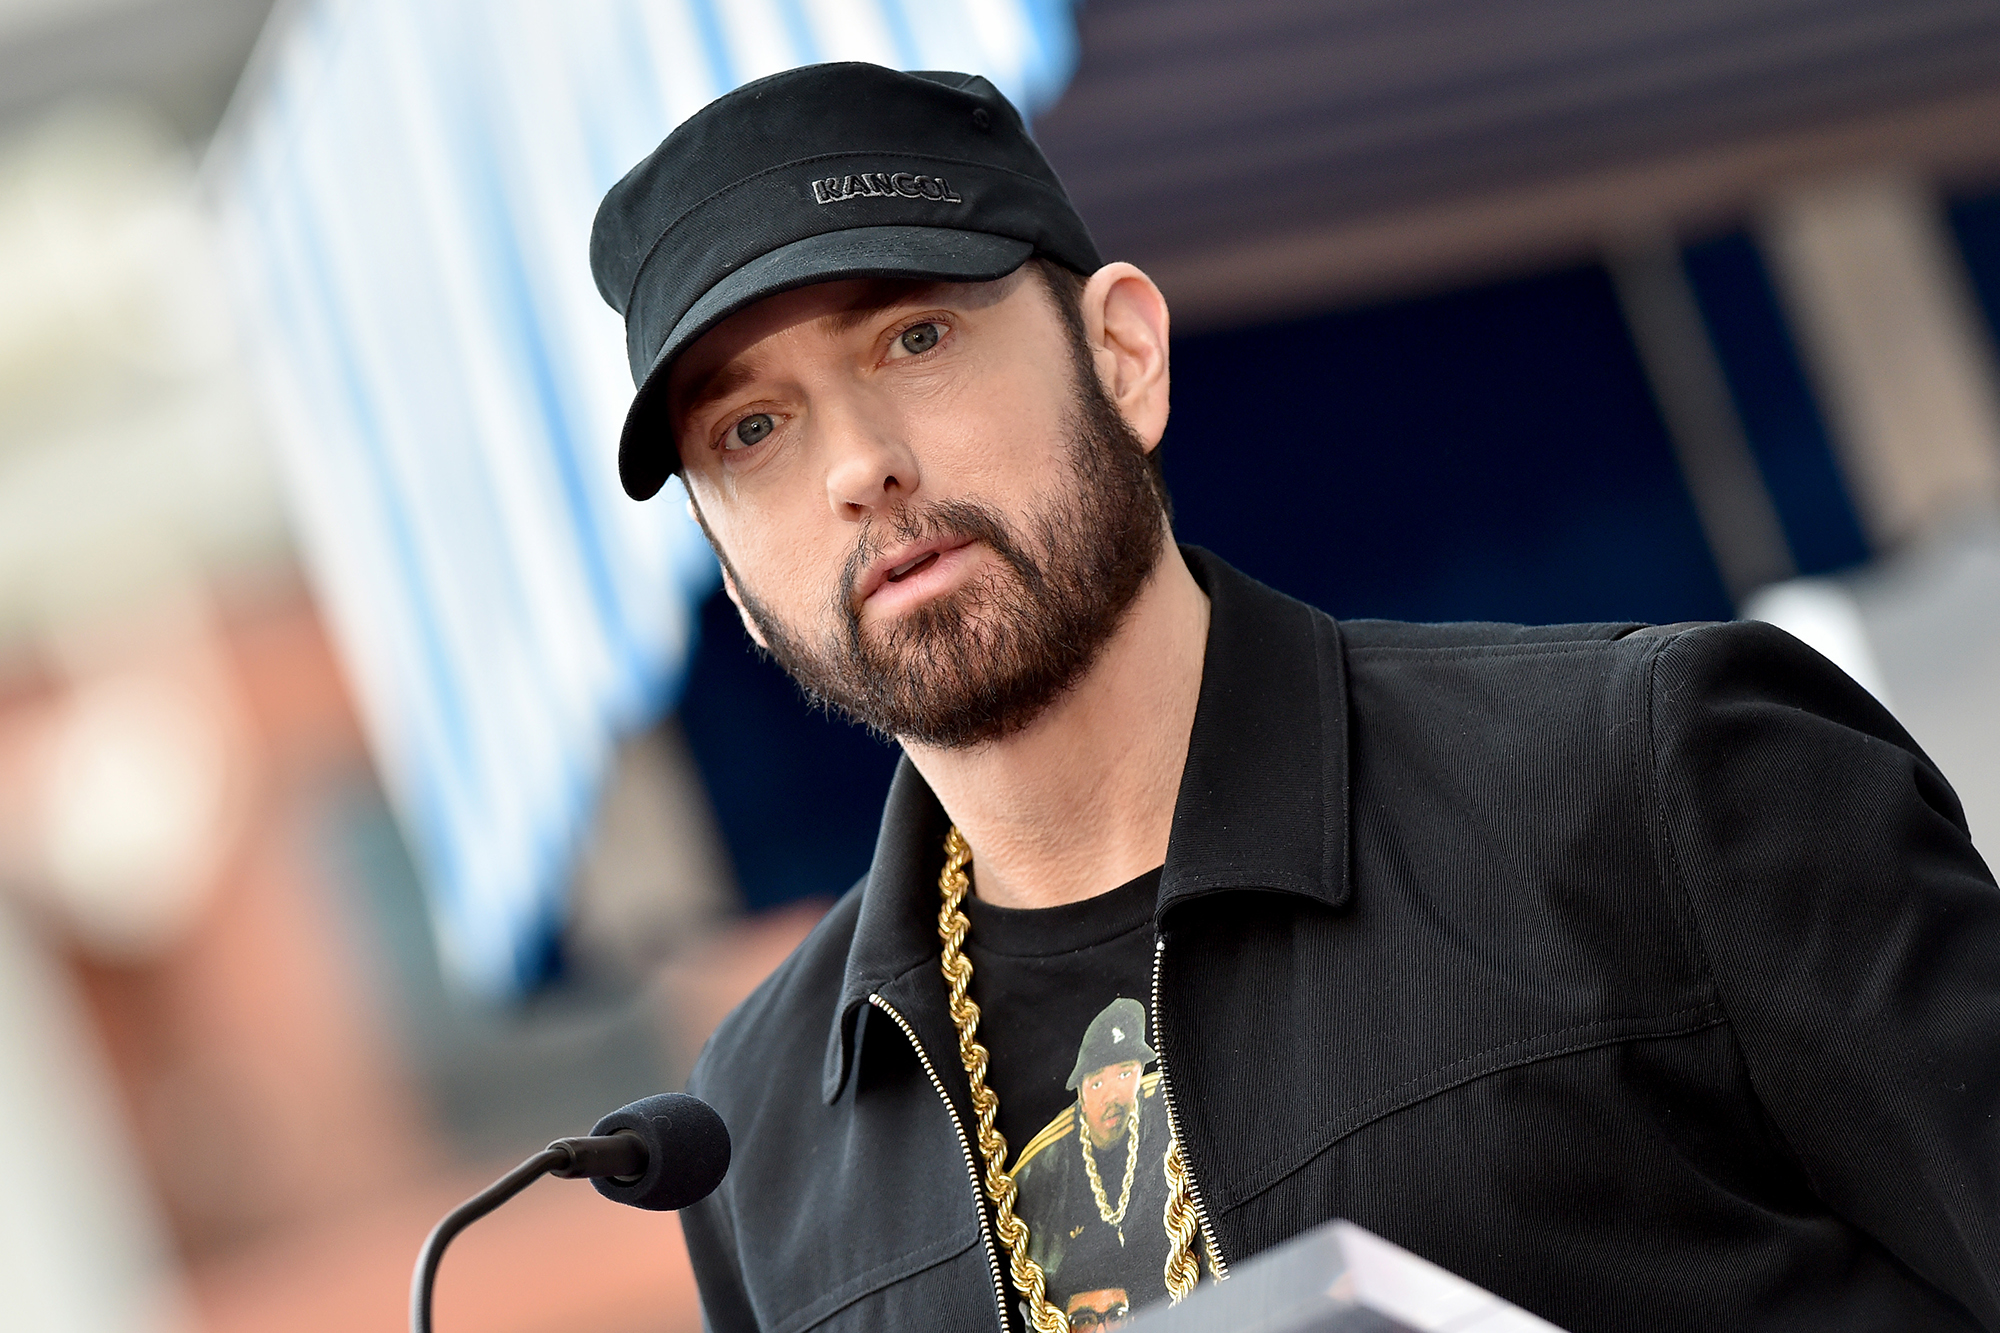 Eminem creates Super Bowl first by bringing deaf rappers into his performance set